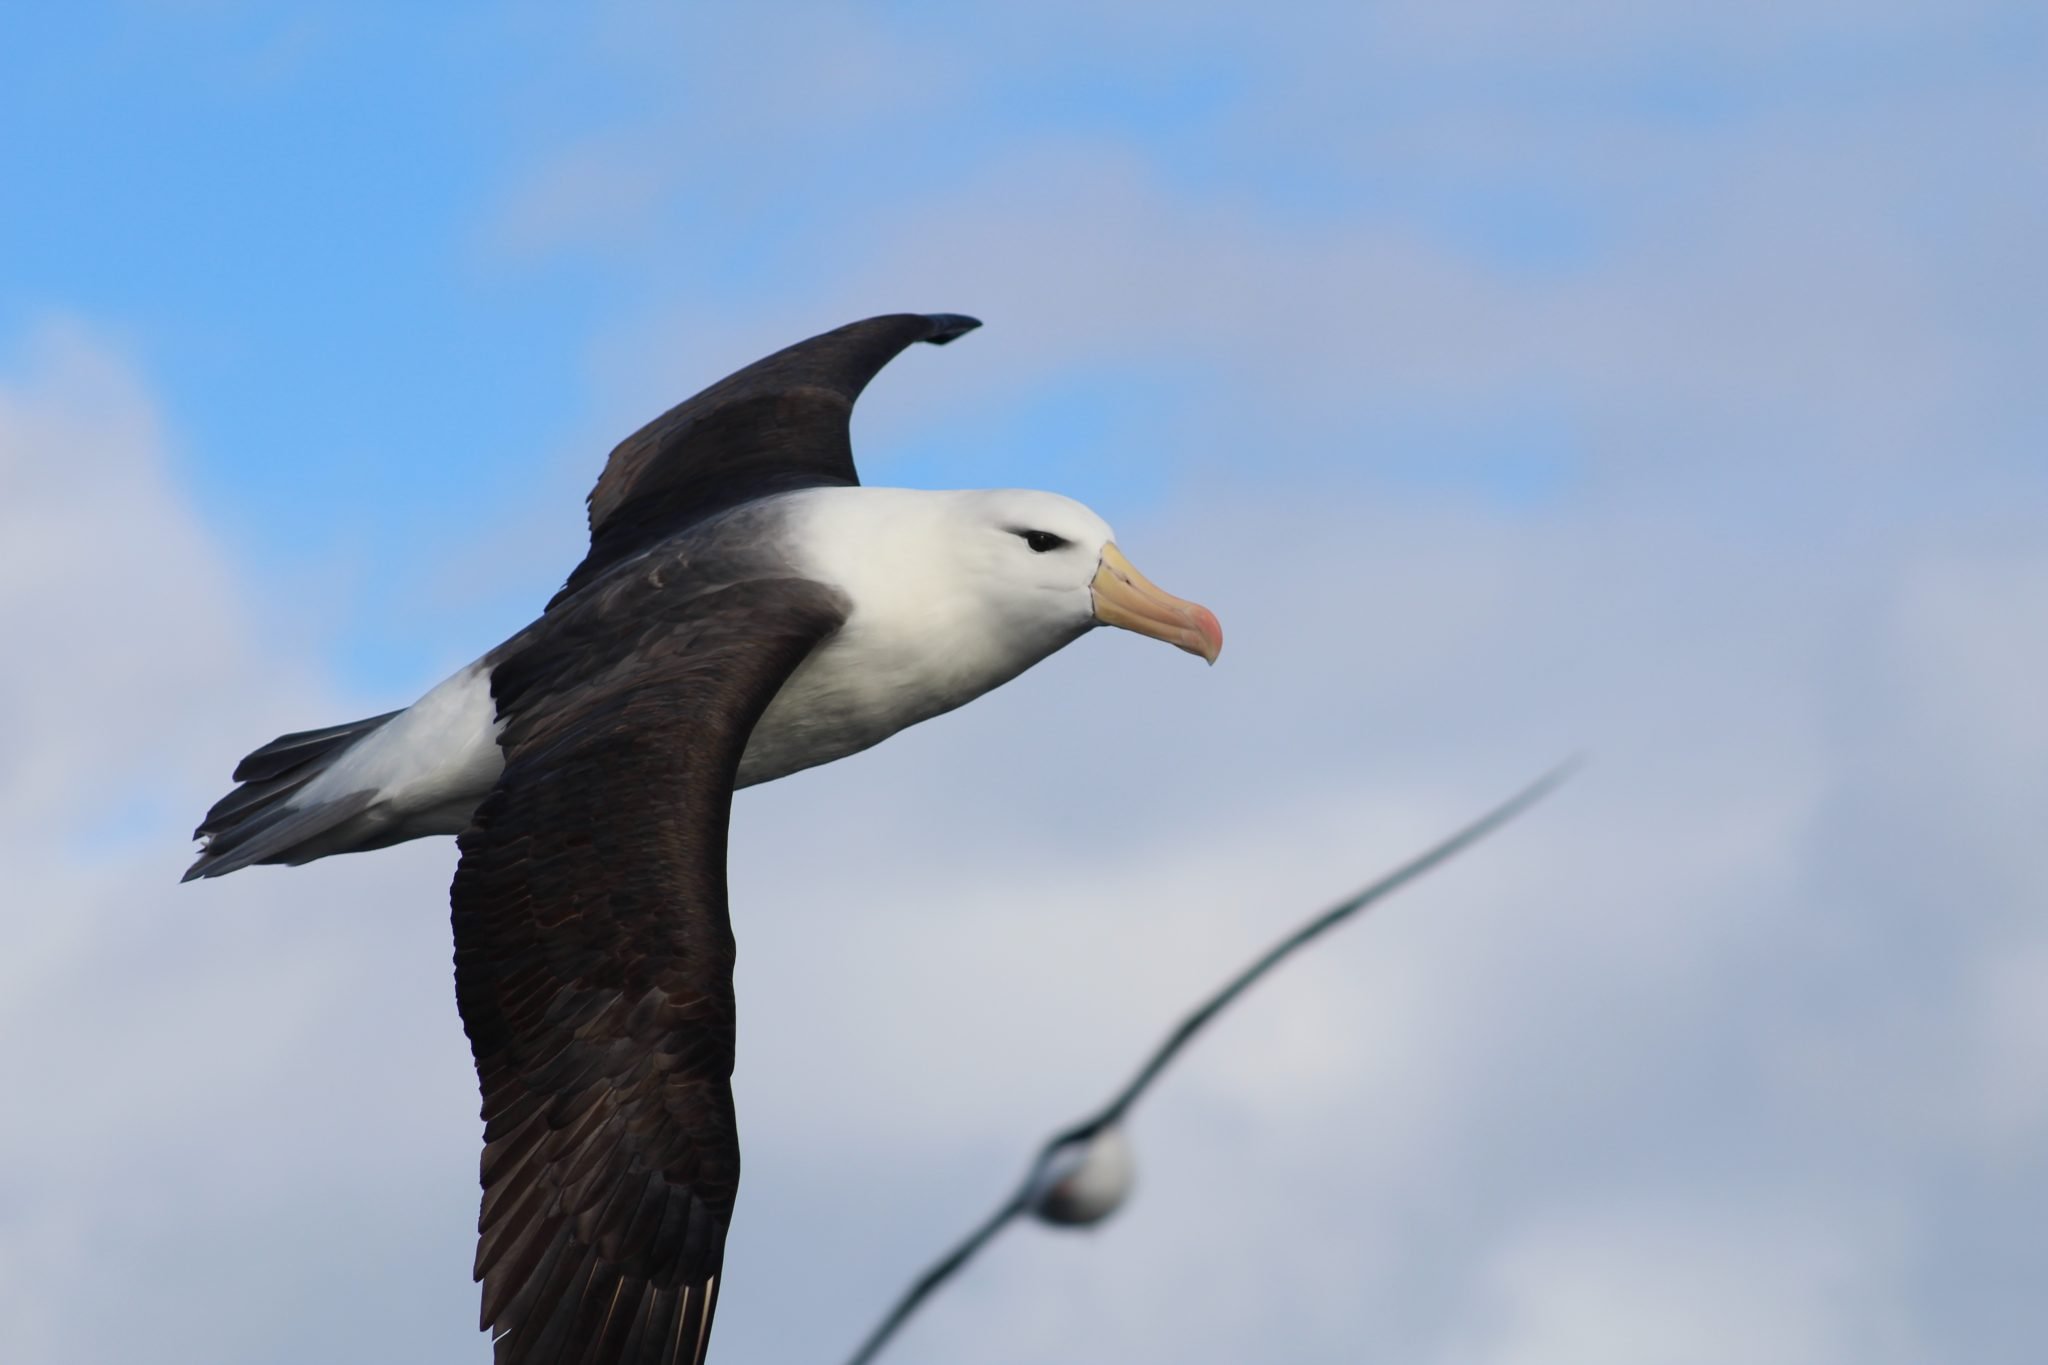 Workshop: Subpesca and IFOP expose measures to reduce seabirds bycatch